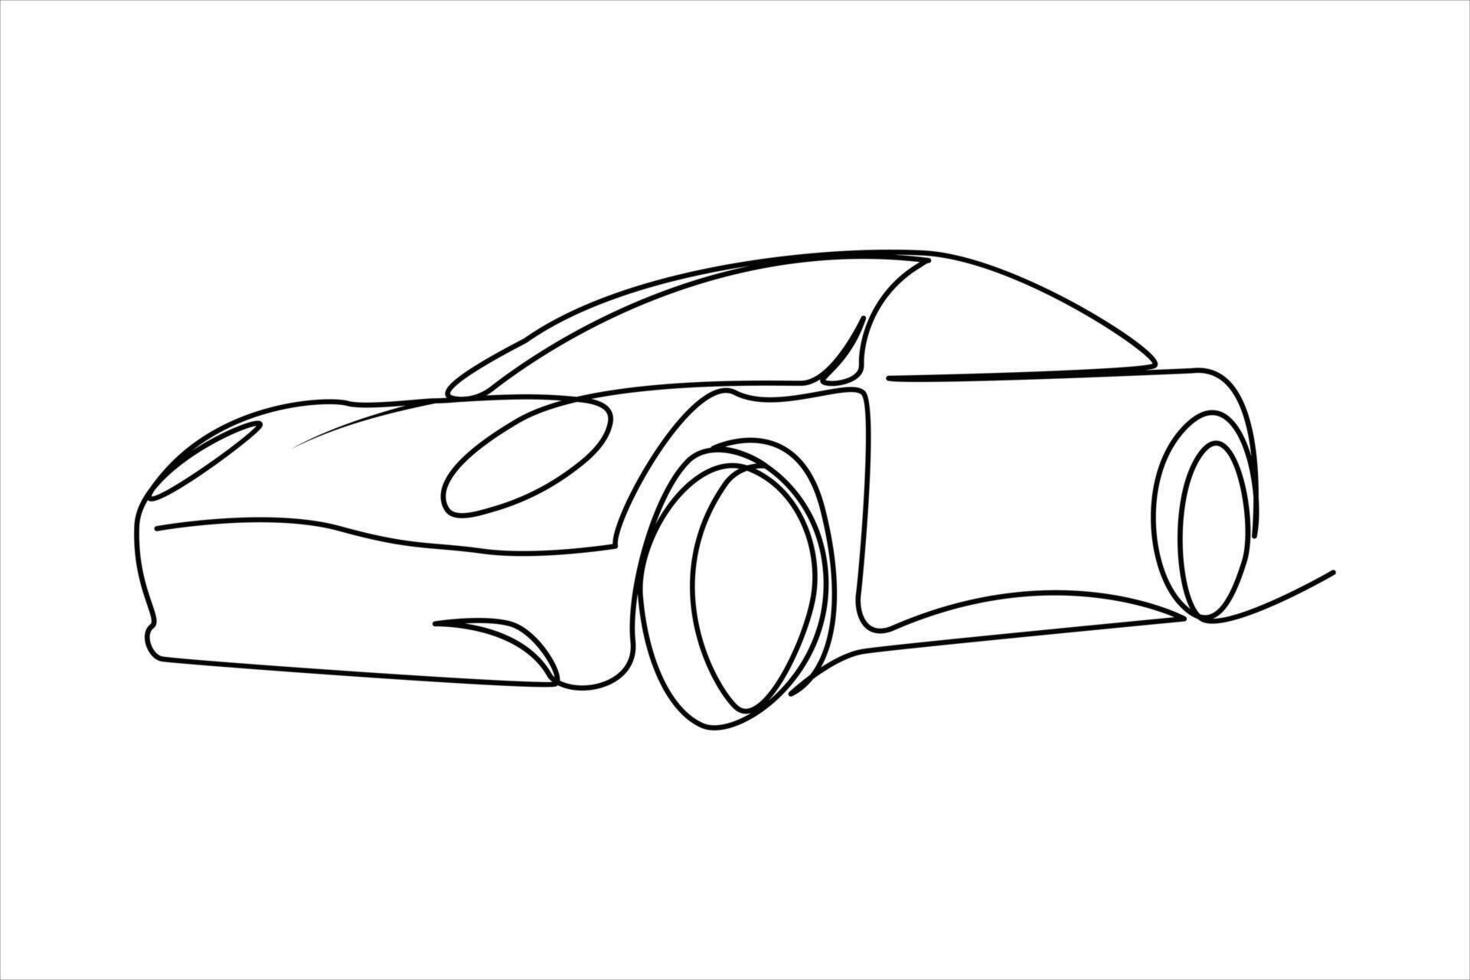 continuous one line drawing of car vector icon. One line Car icon vector background. Car rental icon. Continuous outline of a Car logo icon.